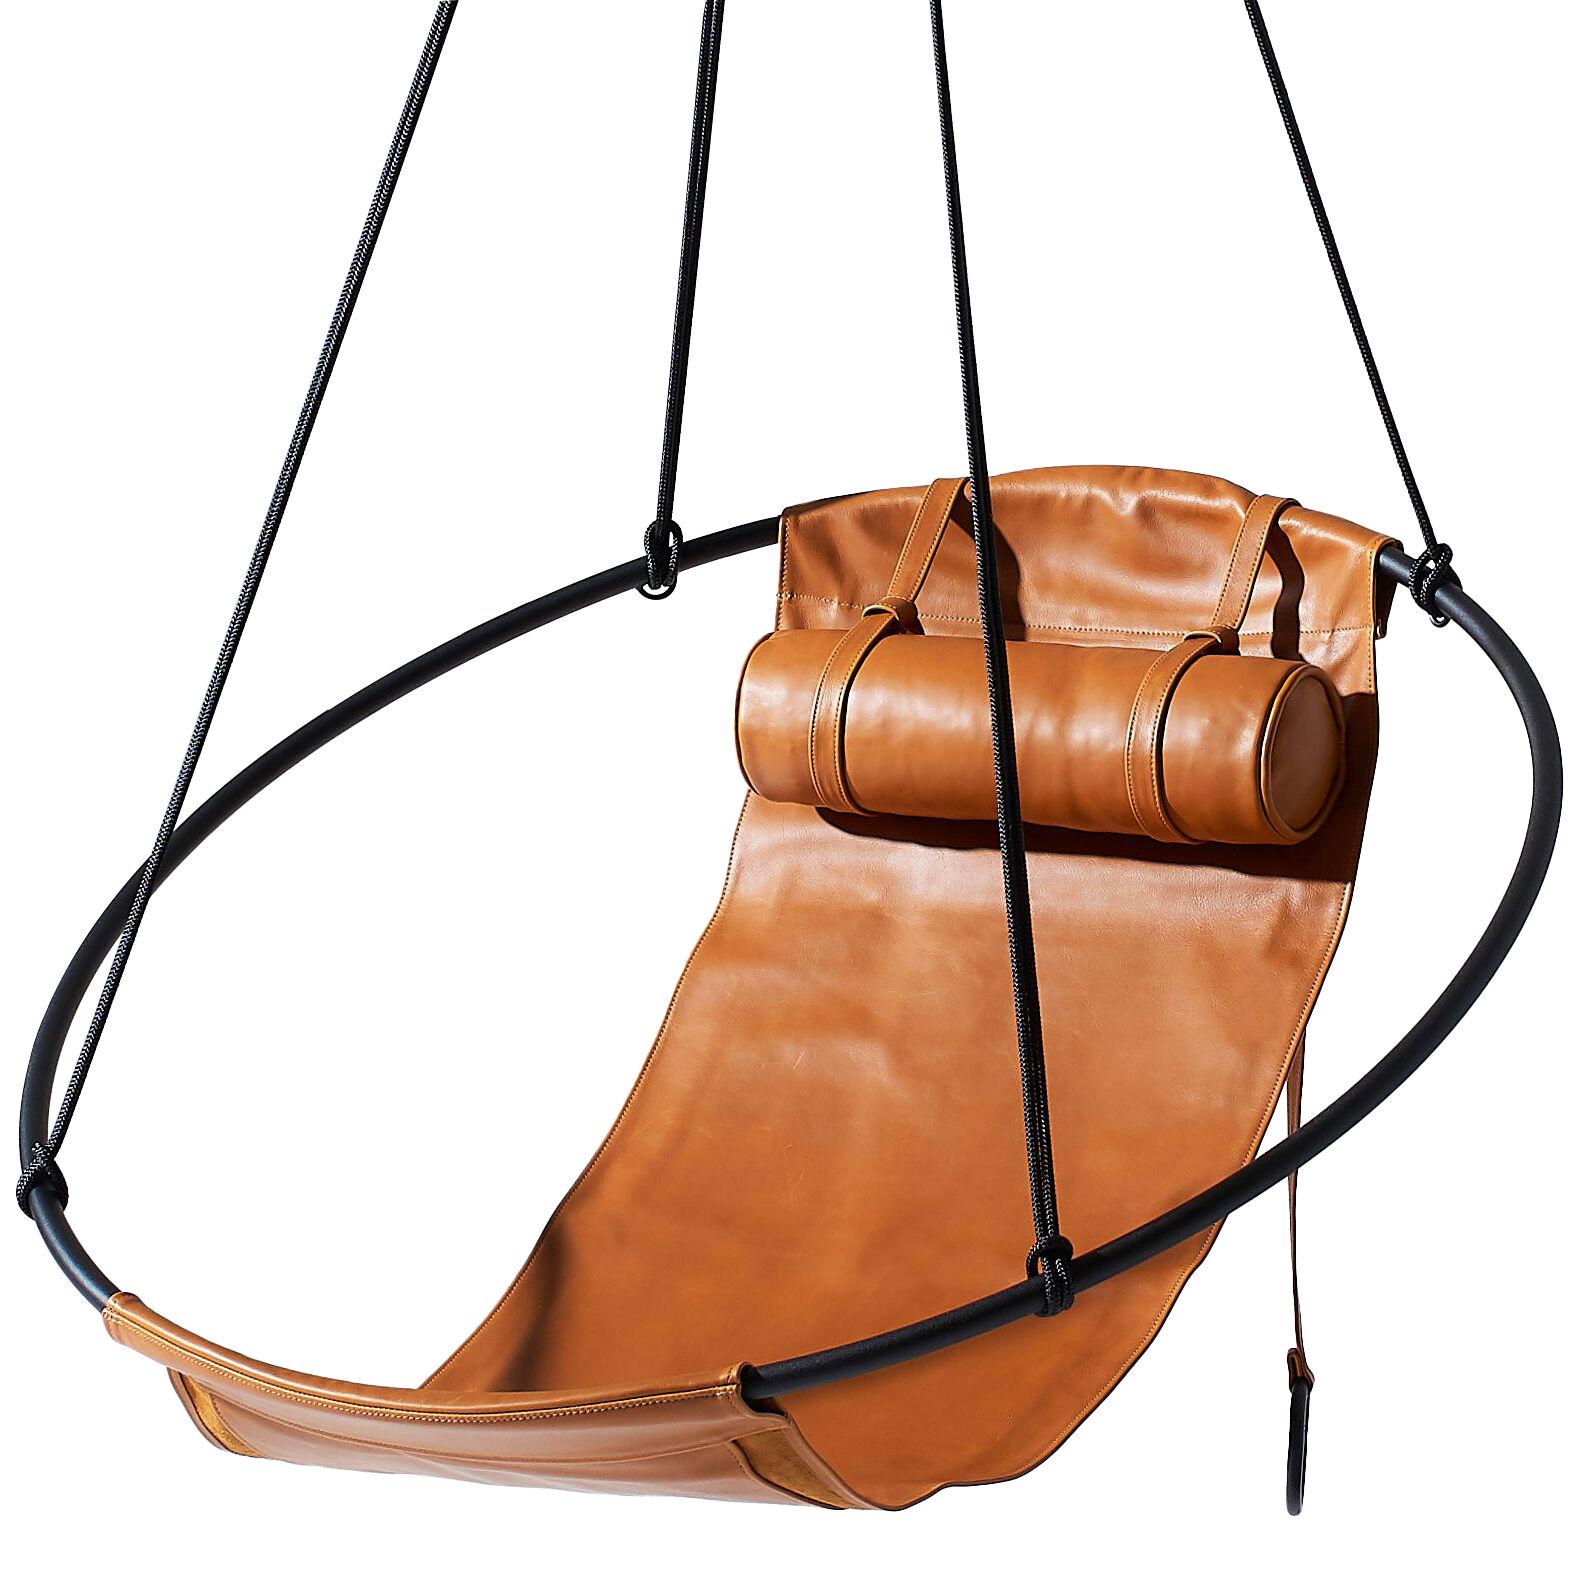 Sling Hanging Chair in Soft Ochre Leather